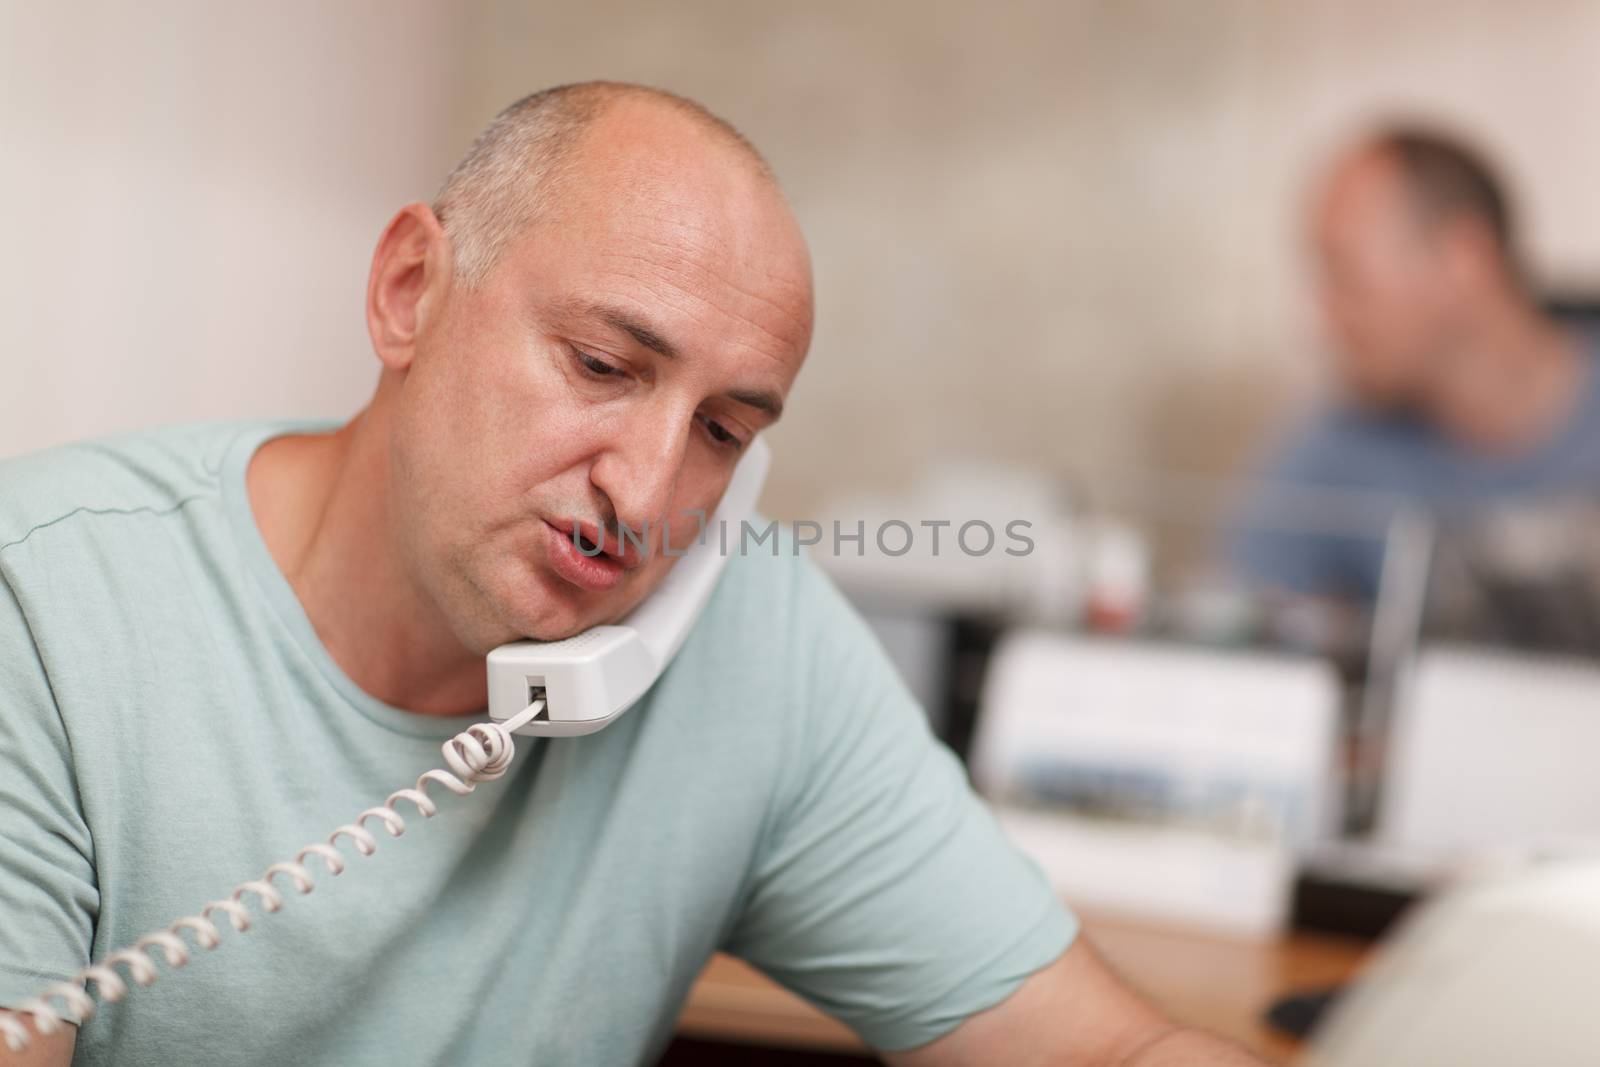 Businessman talking on phone in office by danr13